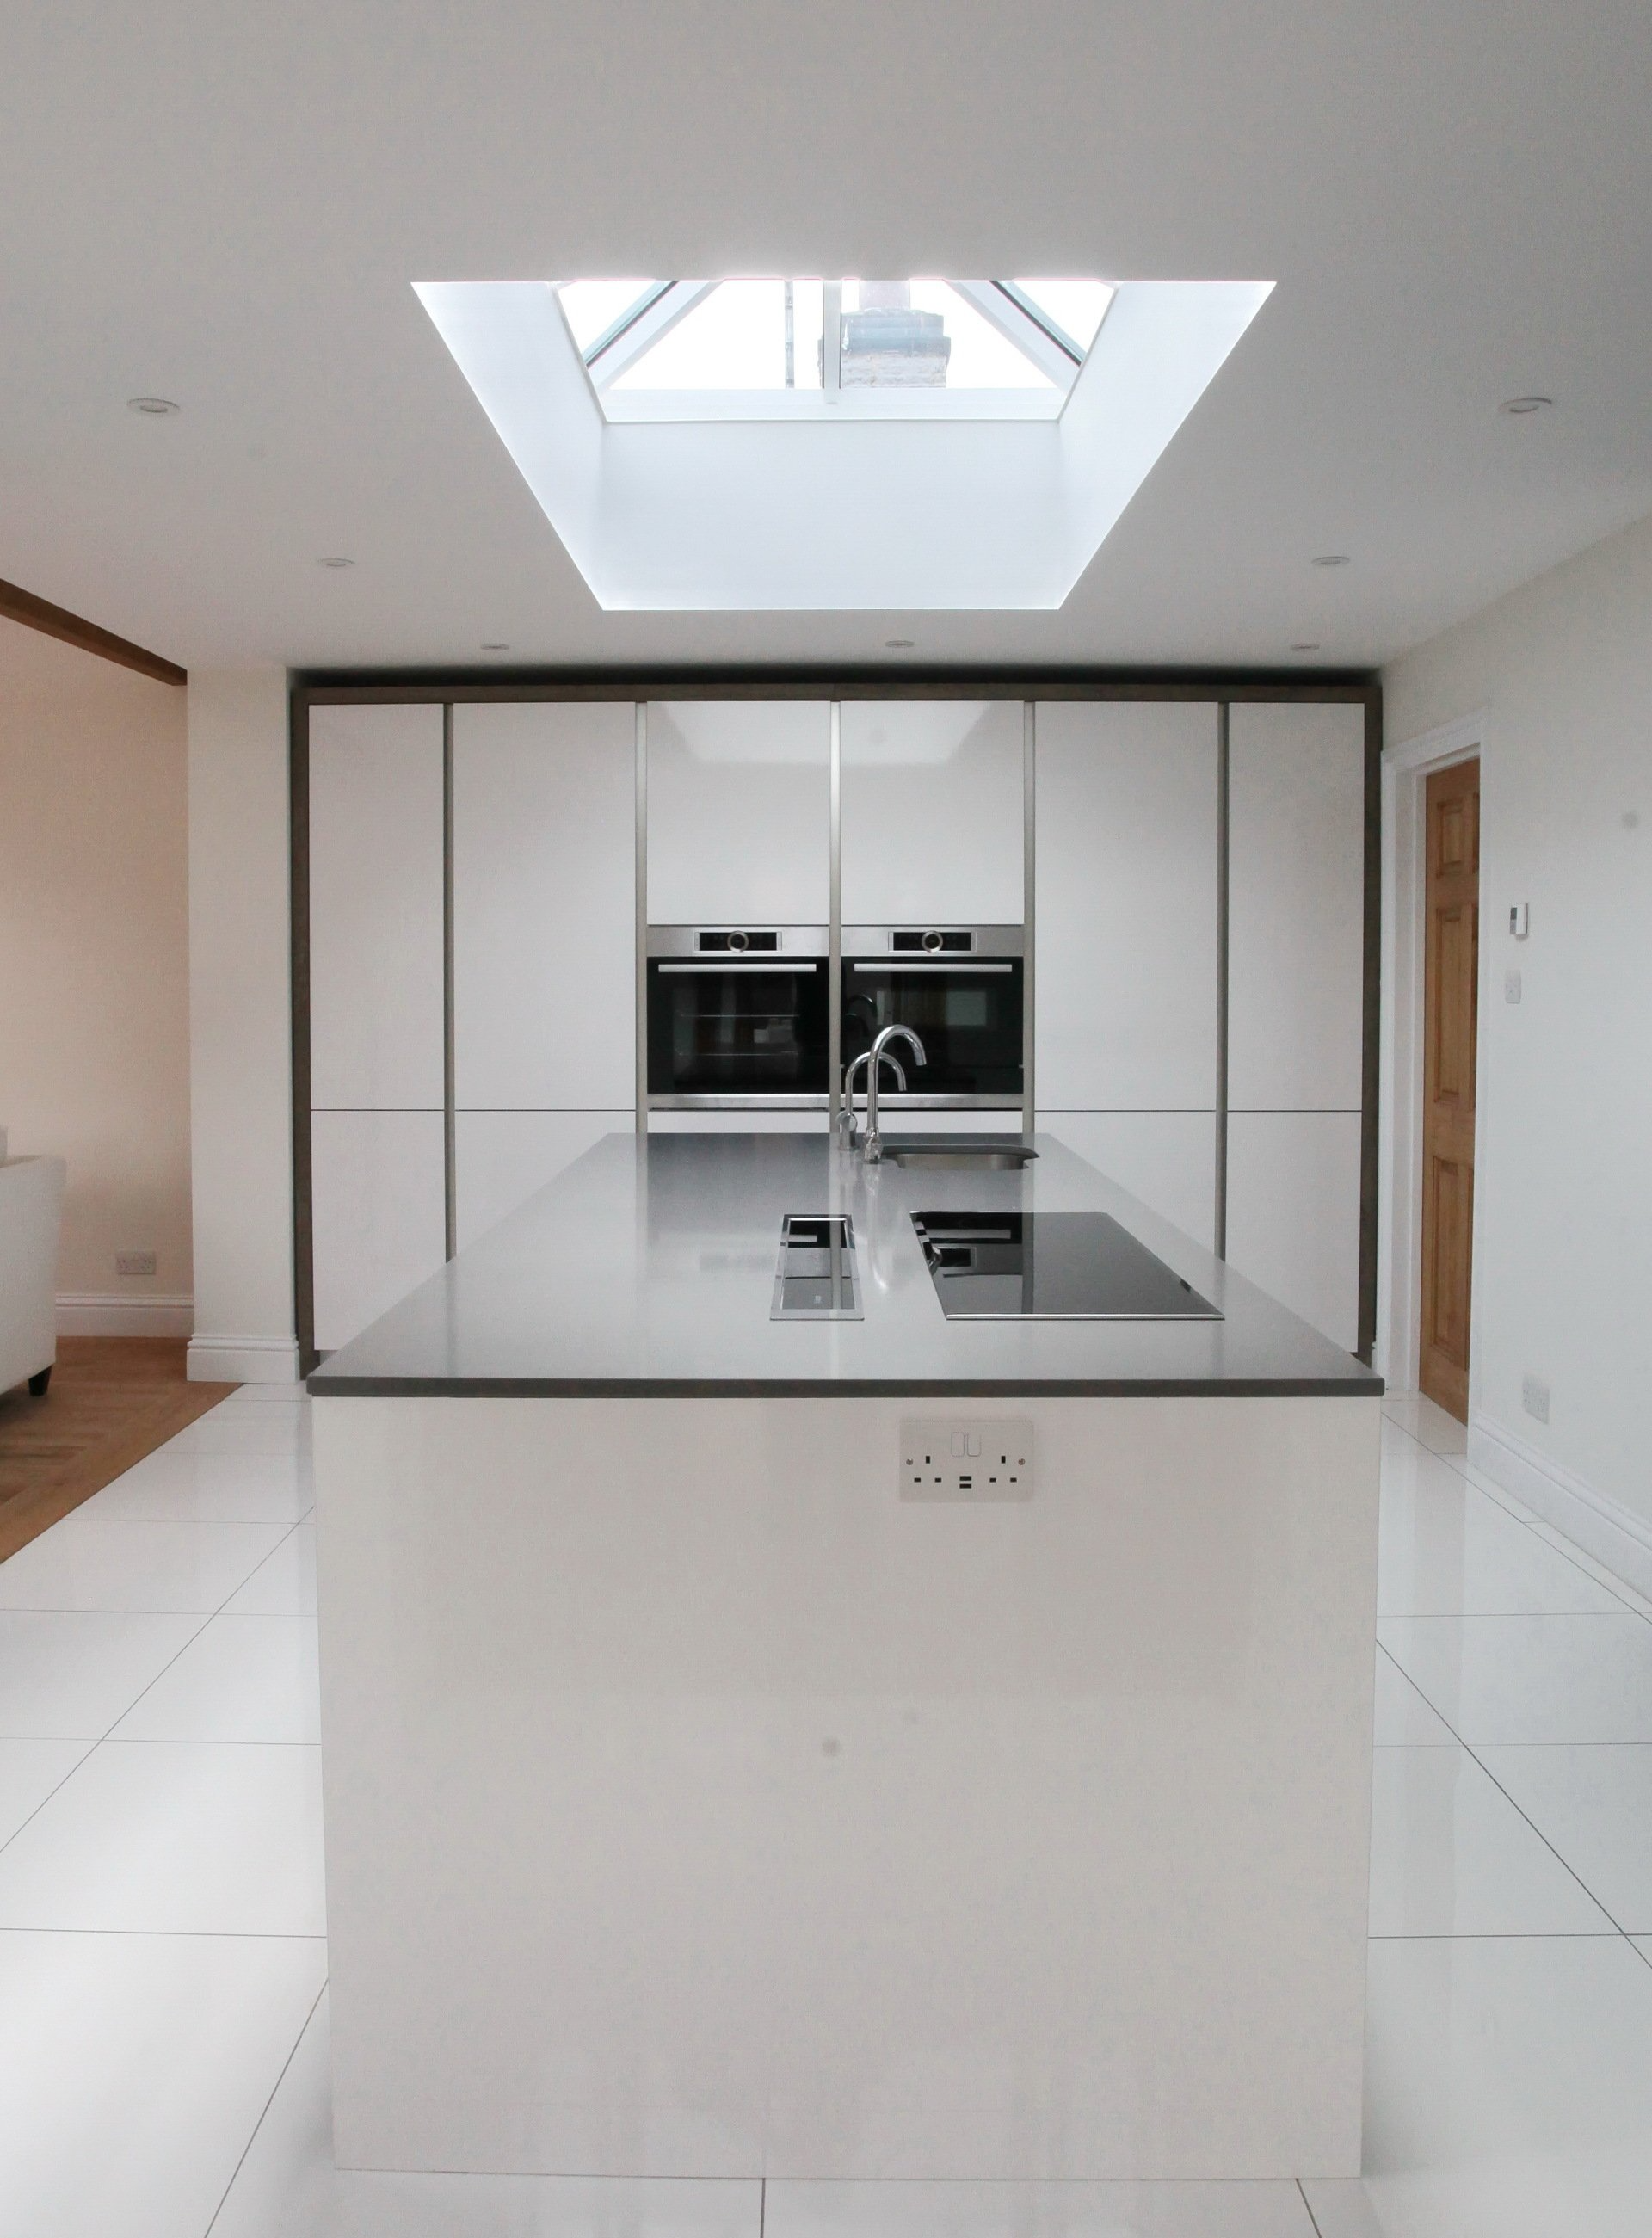 Contemporary handleless kitchen with large skylight by exact